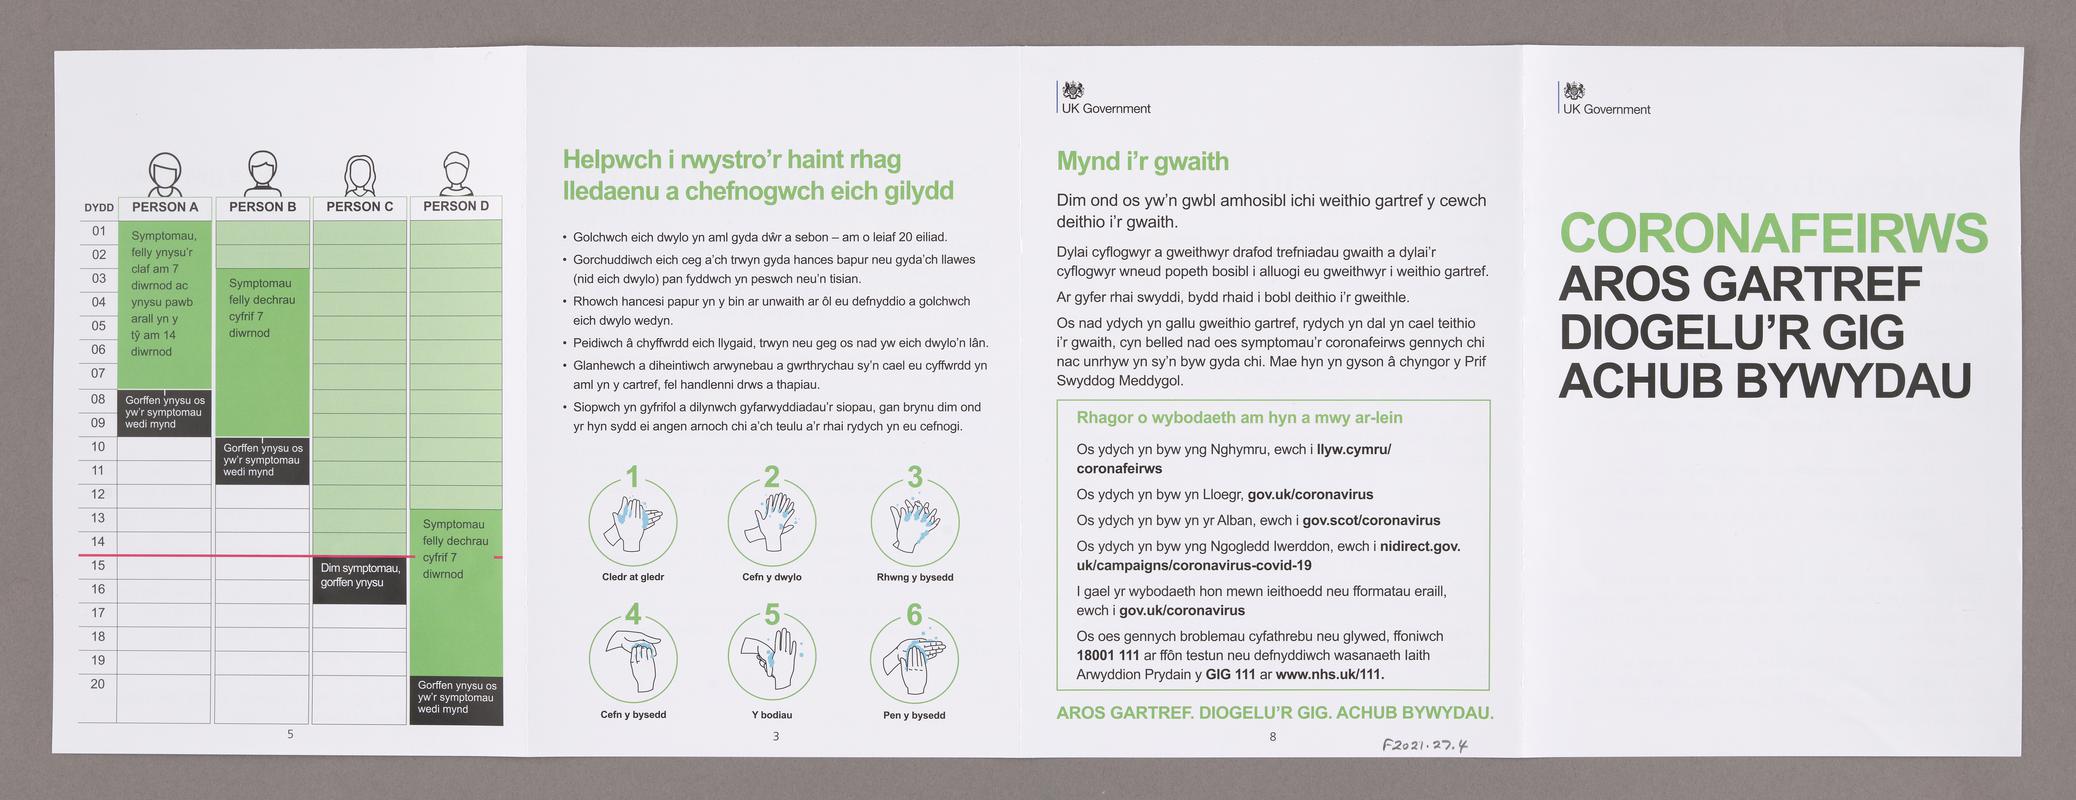 Leaflet &#039;Coronafeirws Aros Gartref Diogelu&#039;r Gig Achub Bywydau&#039; sent by UK Government to every UK household in April 2020.